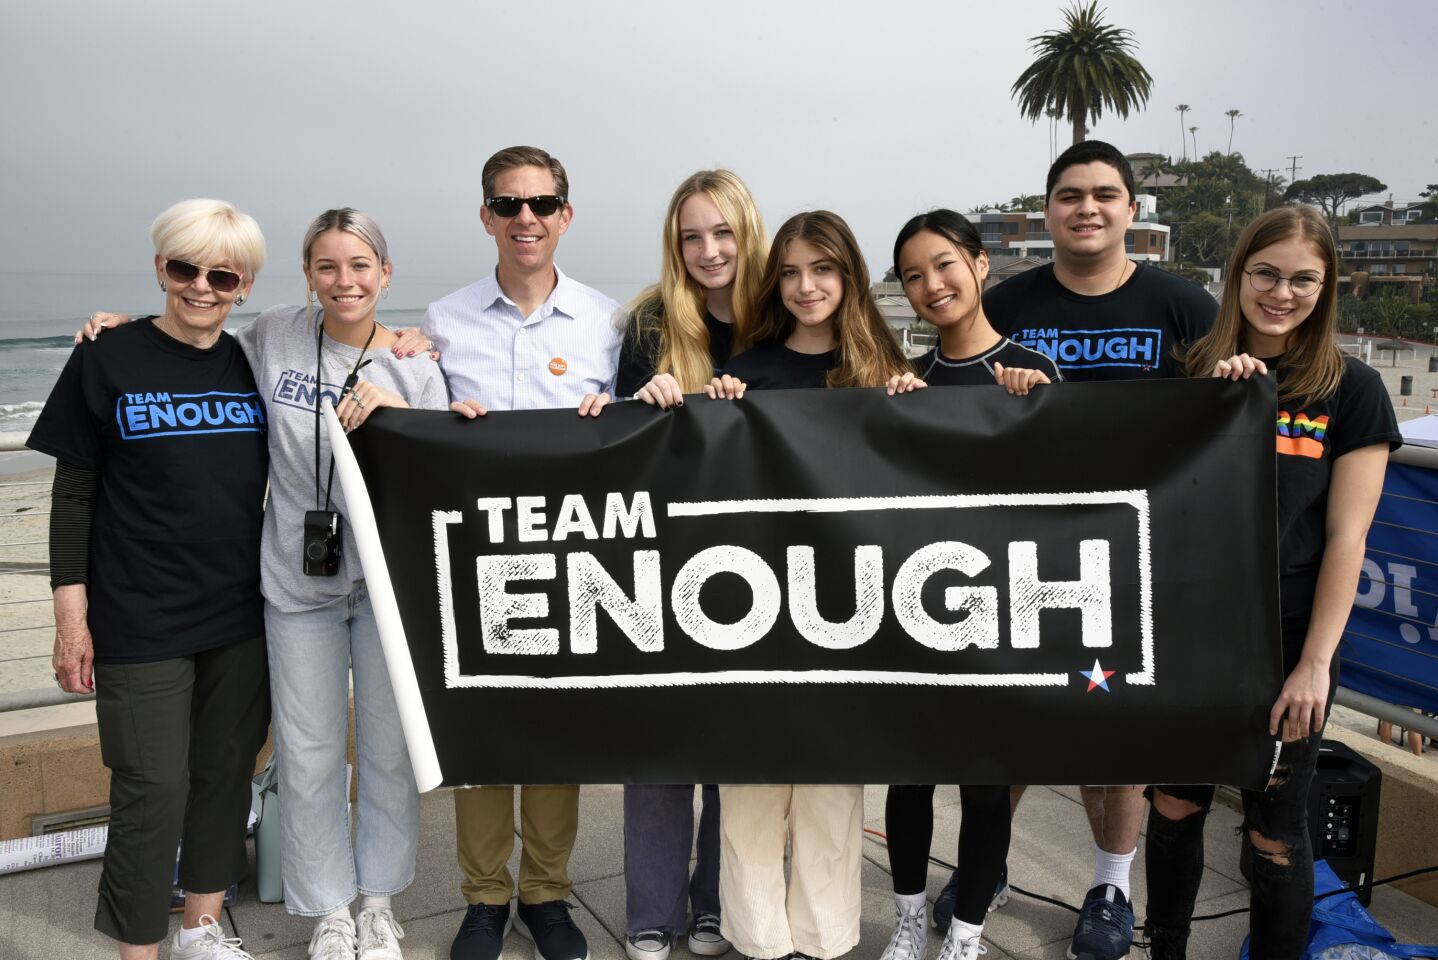 Congressman Mike Levin (3rd from left), Team Enough National Chapter Coordinator/event co-organizer Stephan Abrams (2nd from right), with Grauer student organizers and supporters